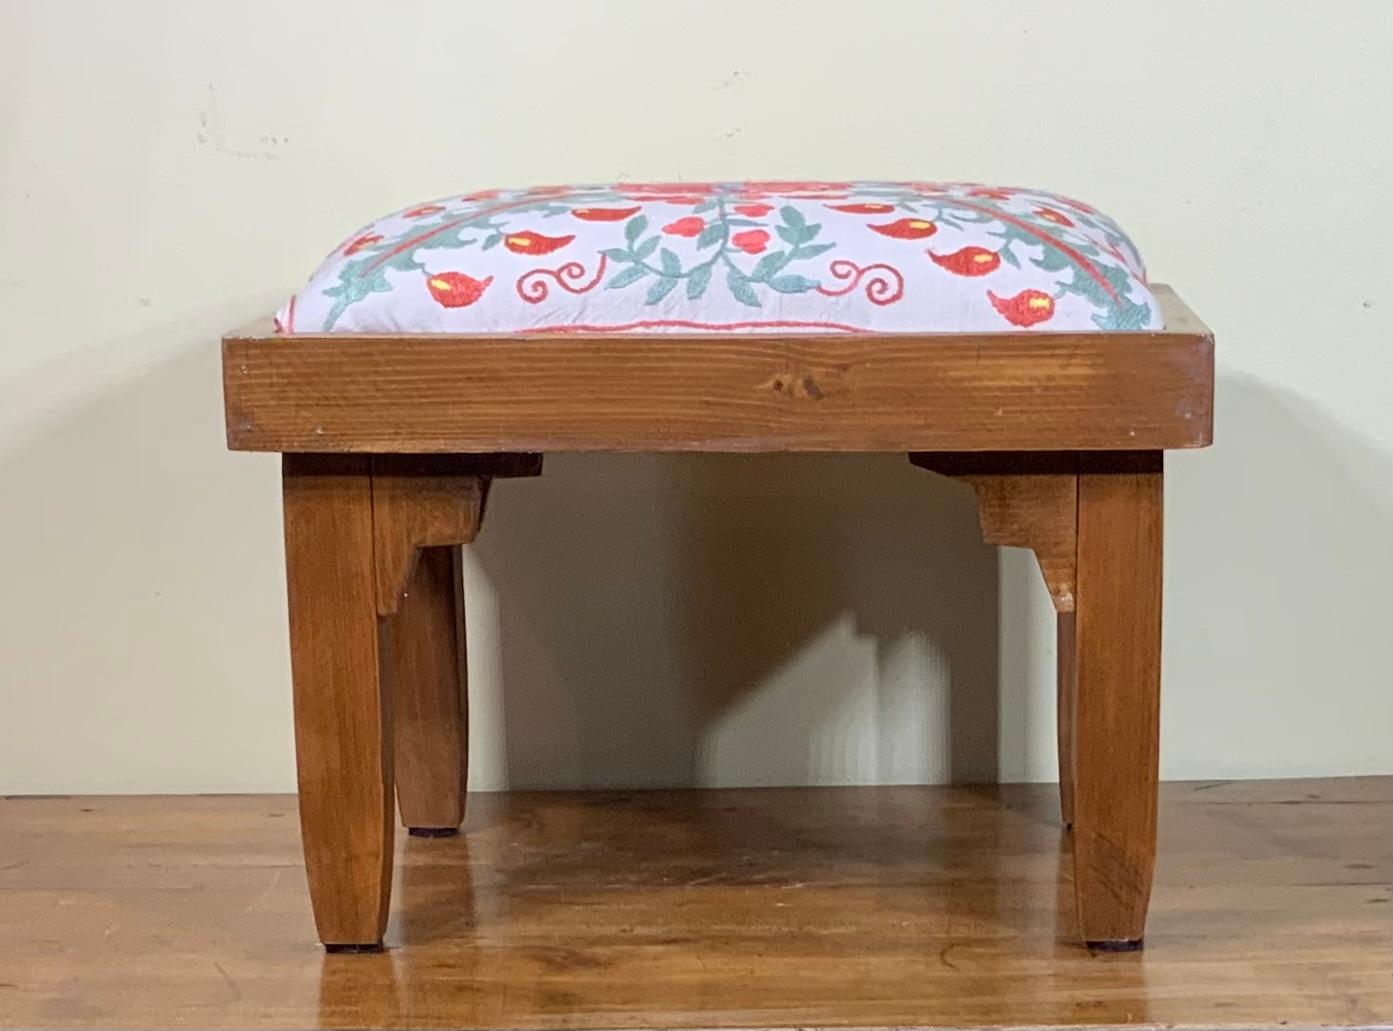 Exceptional amish foot stool made of wood, newly upholster with beautiful hand embroidery Suzani textile great decorative item for any room.